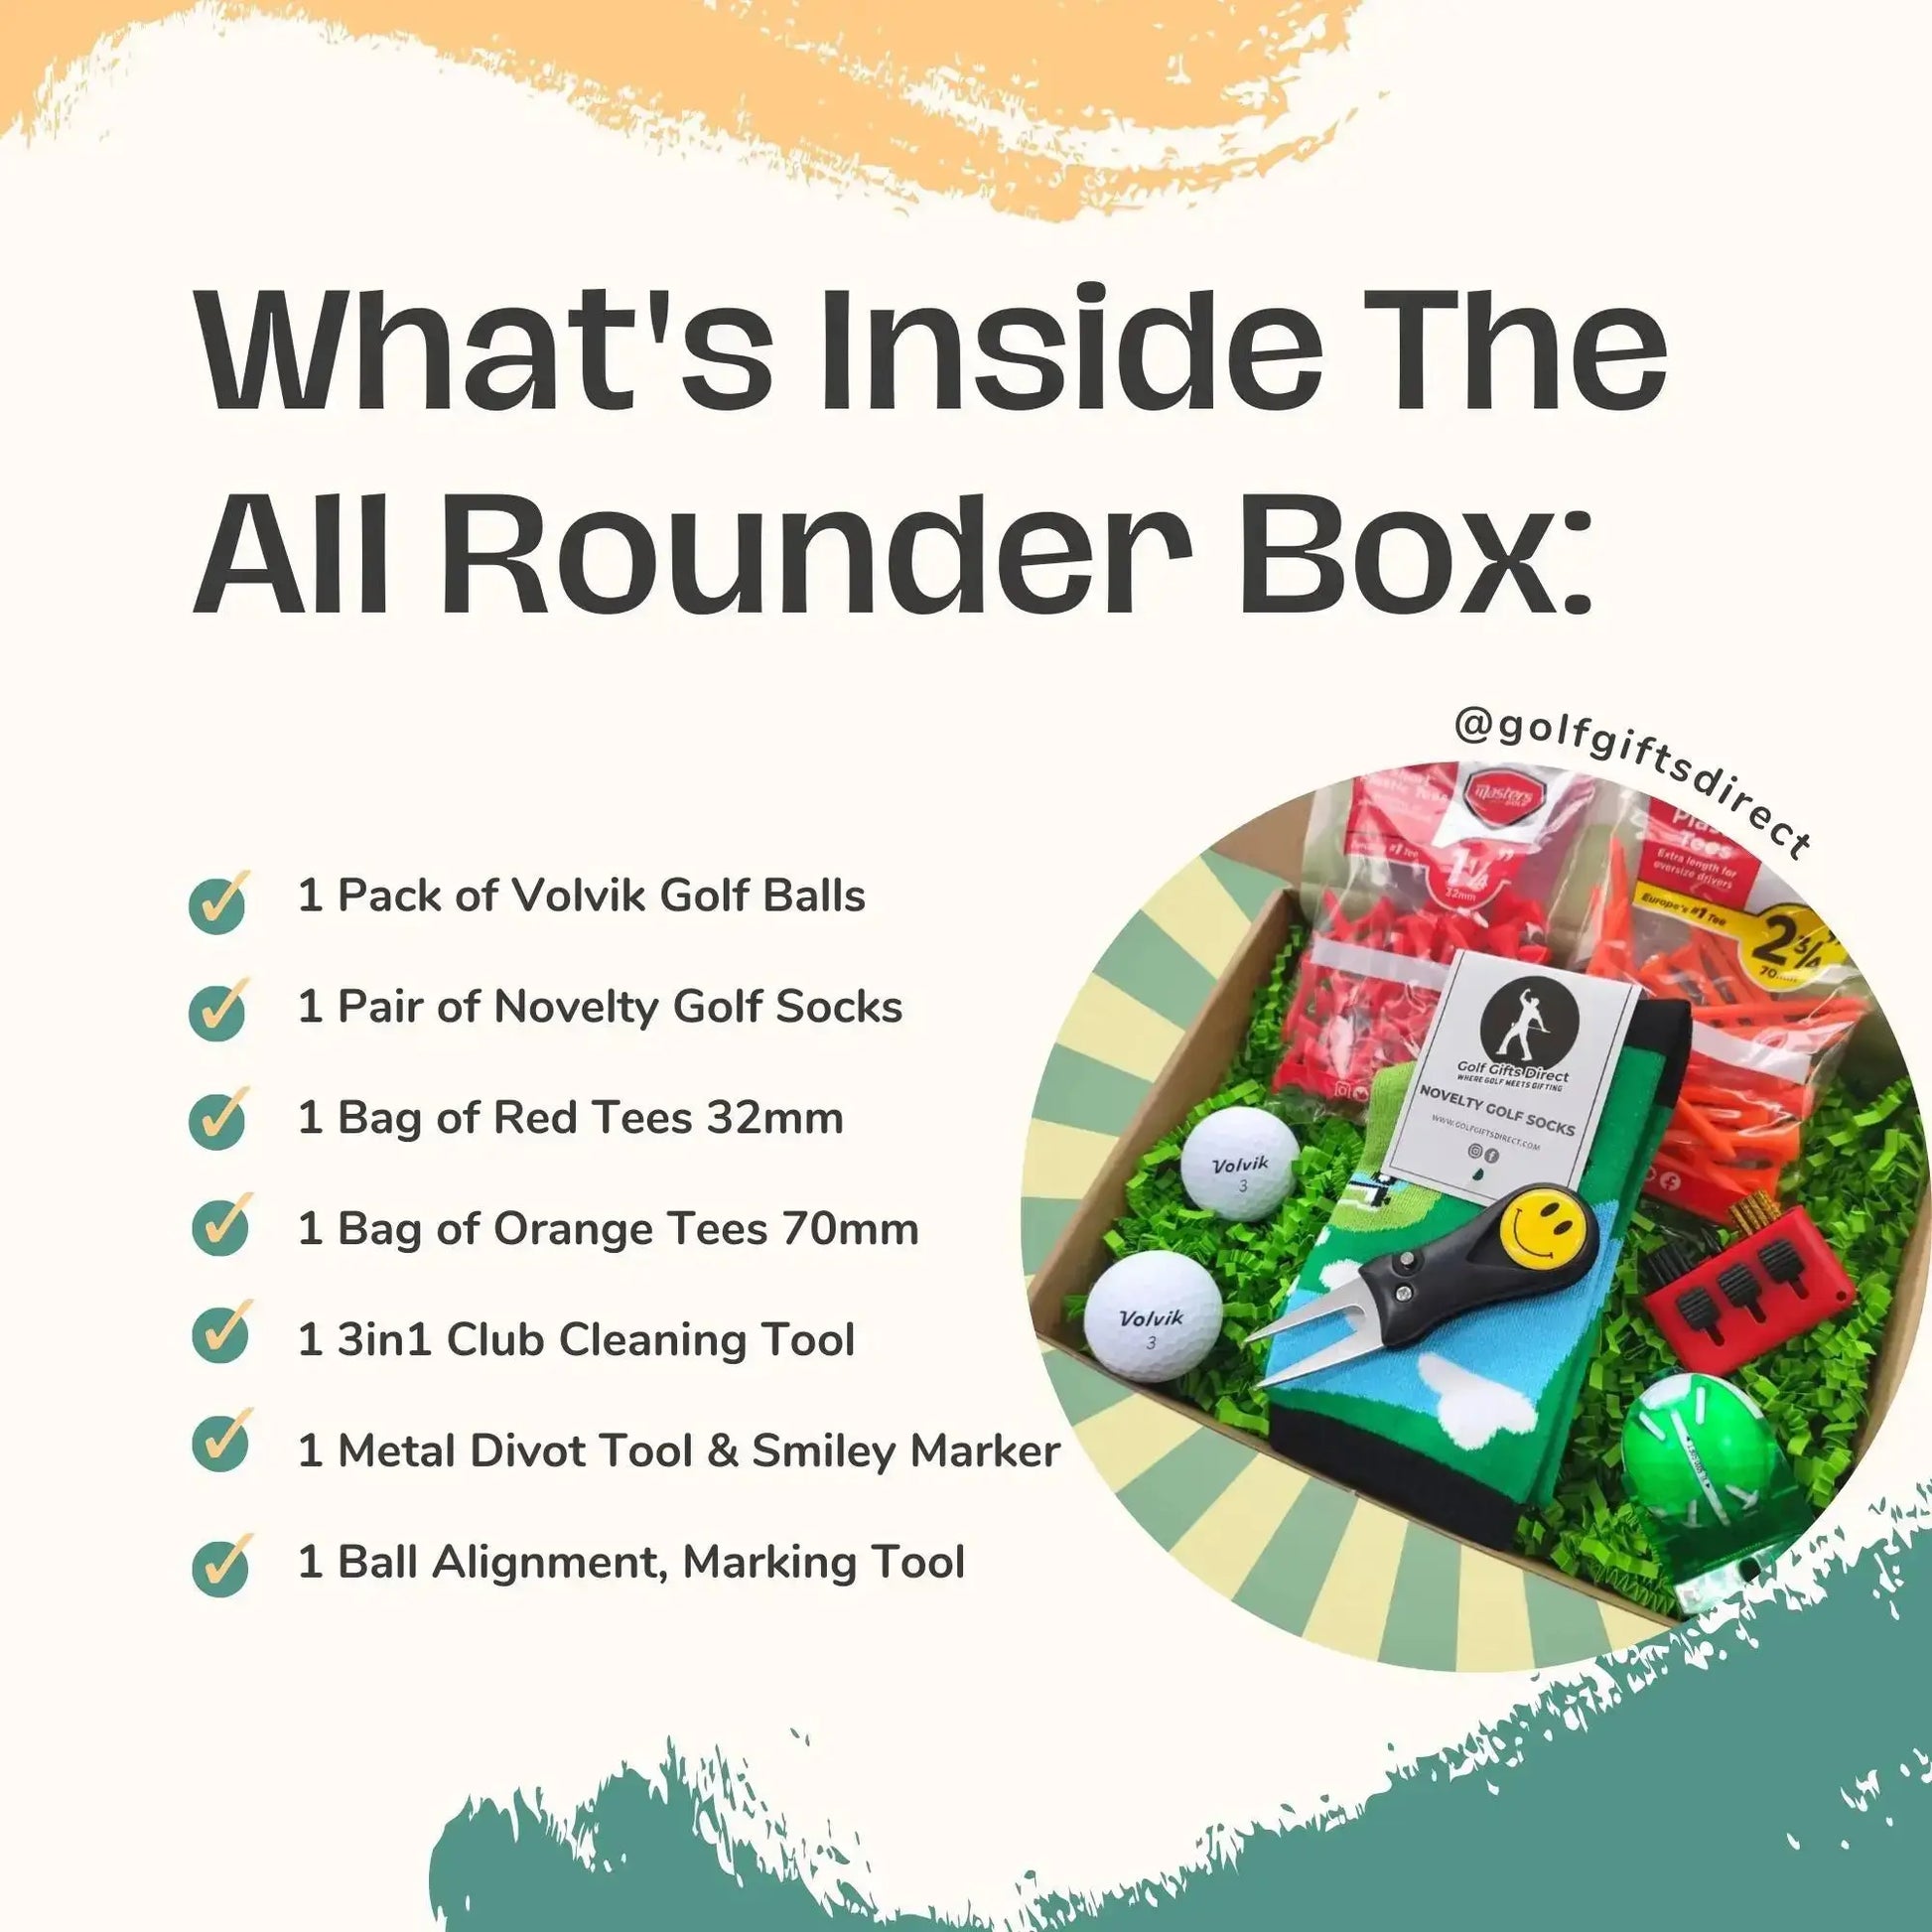 Golf Gifts For Men - The All Rounder Gift Box - The Perfect Choice